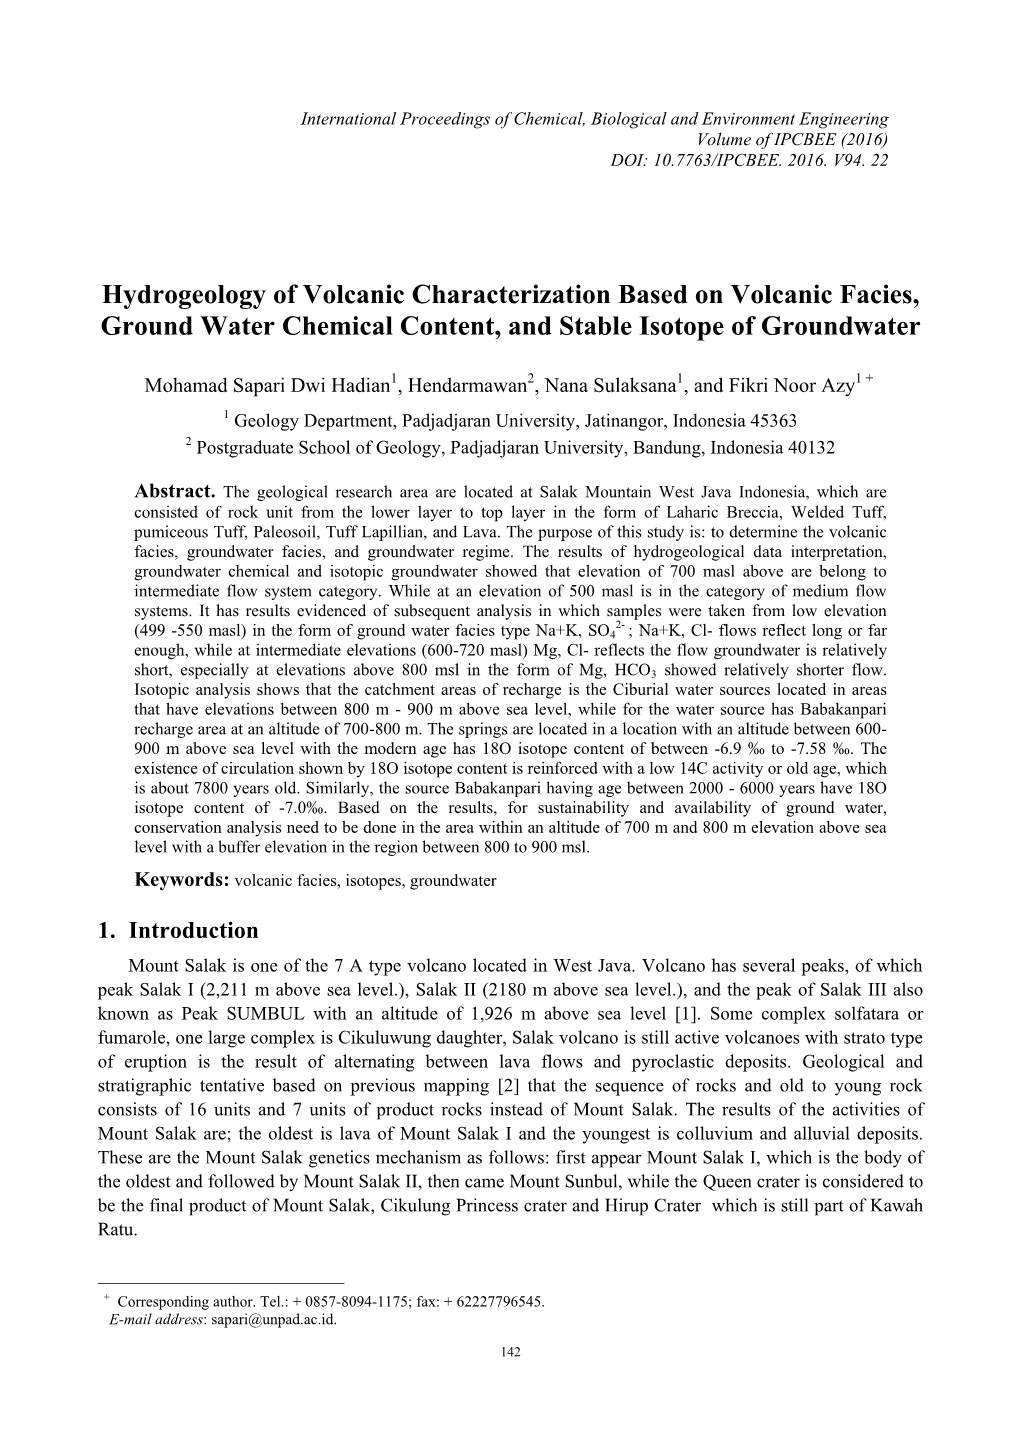 Hydrogeology of Volcanic Characterization Based on Volcanic Facies, Ground Water Chemical Content, and Stable Isotope of Groundwater